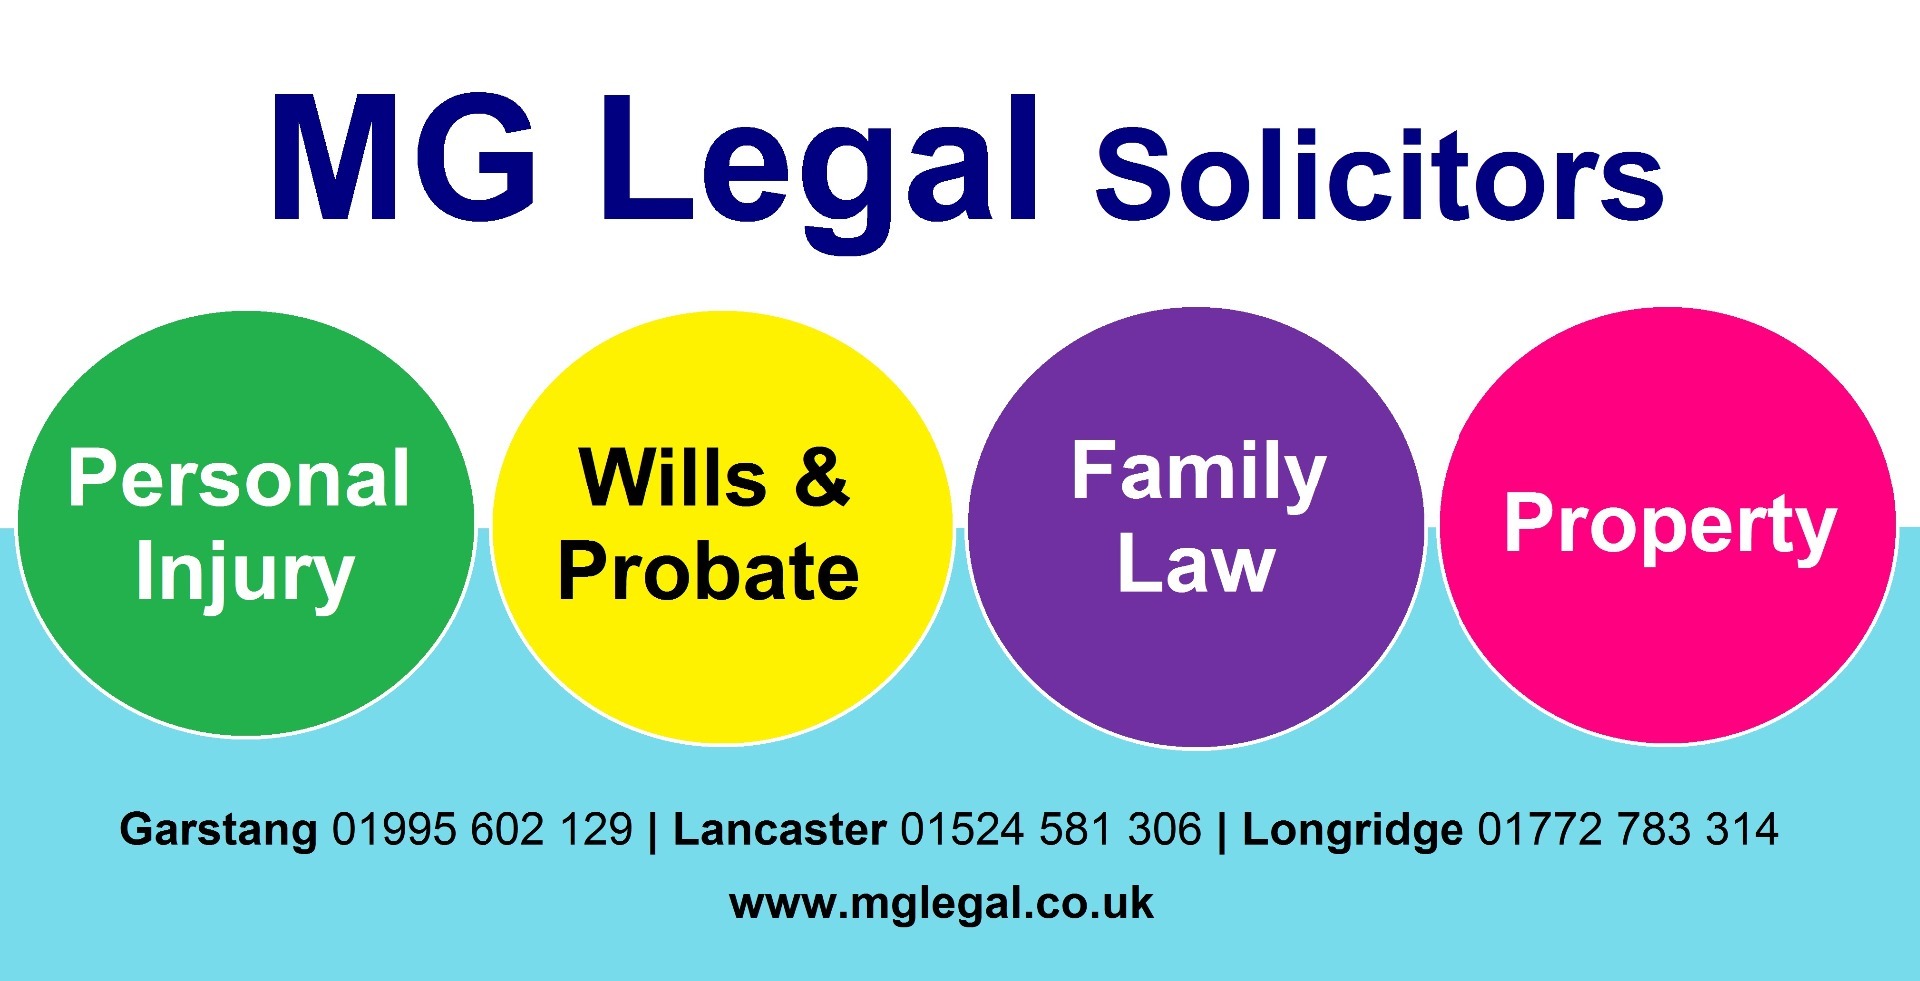 MG Legal Solicitors Design with four 'balls' stating 'Personal Injury', Wills & Probate, Family Law and Property.  The contact numbers for Garstang Lancaster and Longridge and the web address.